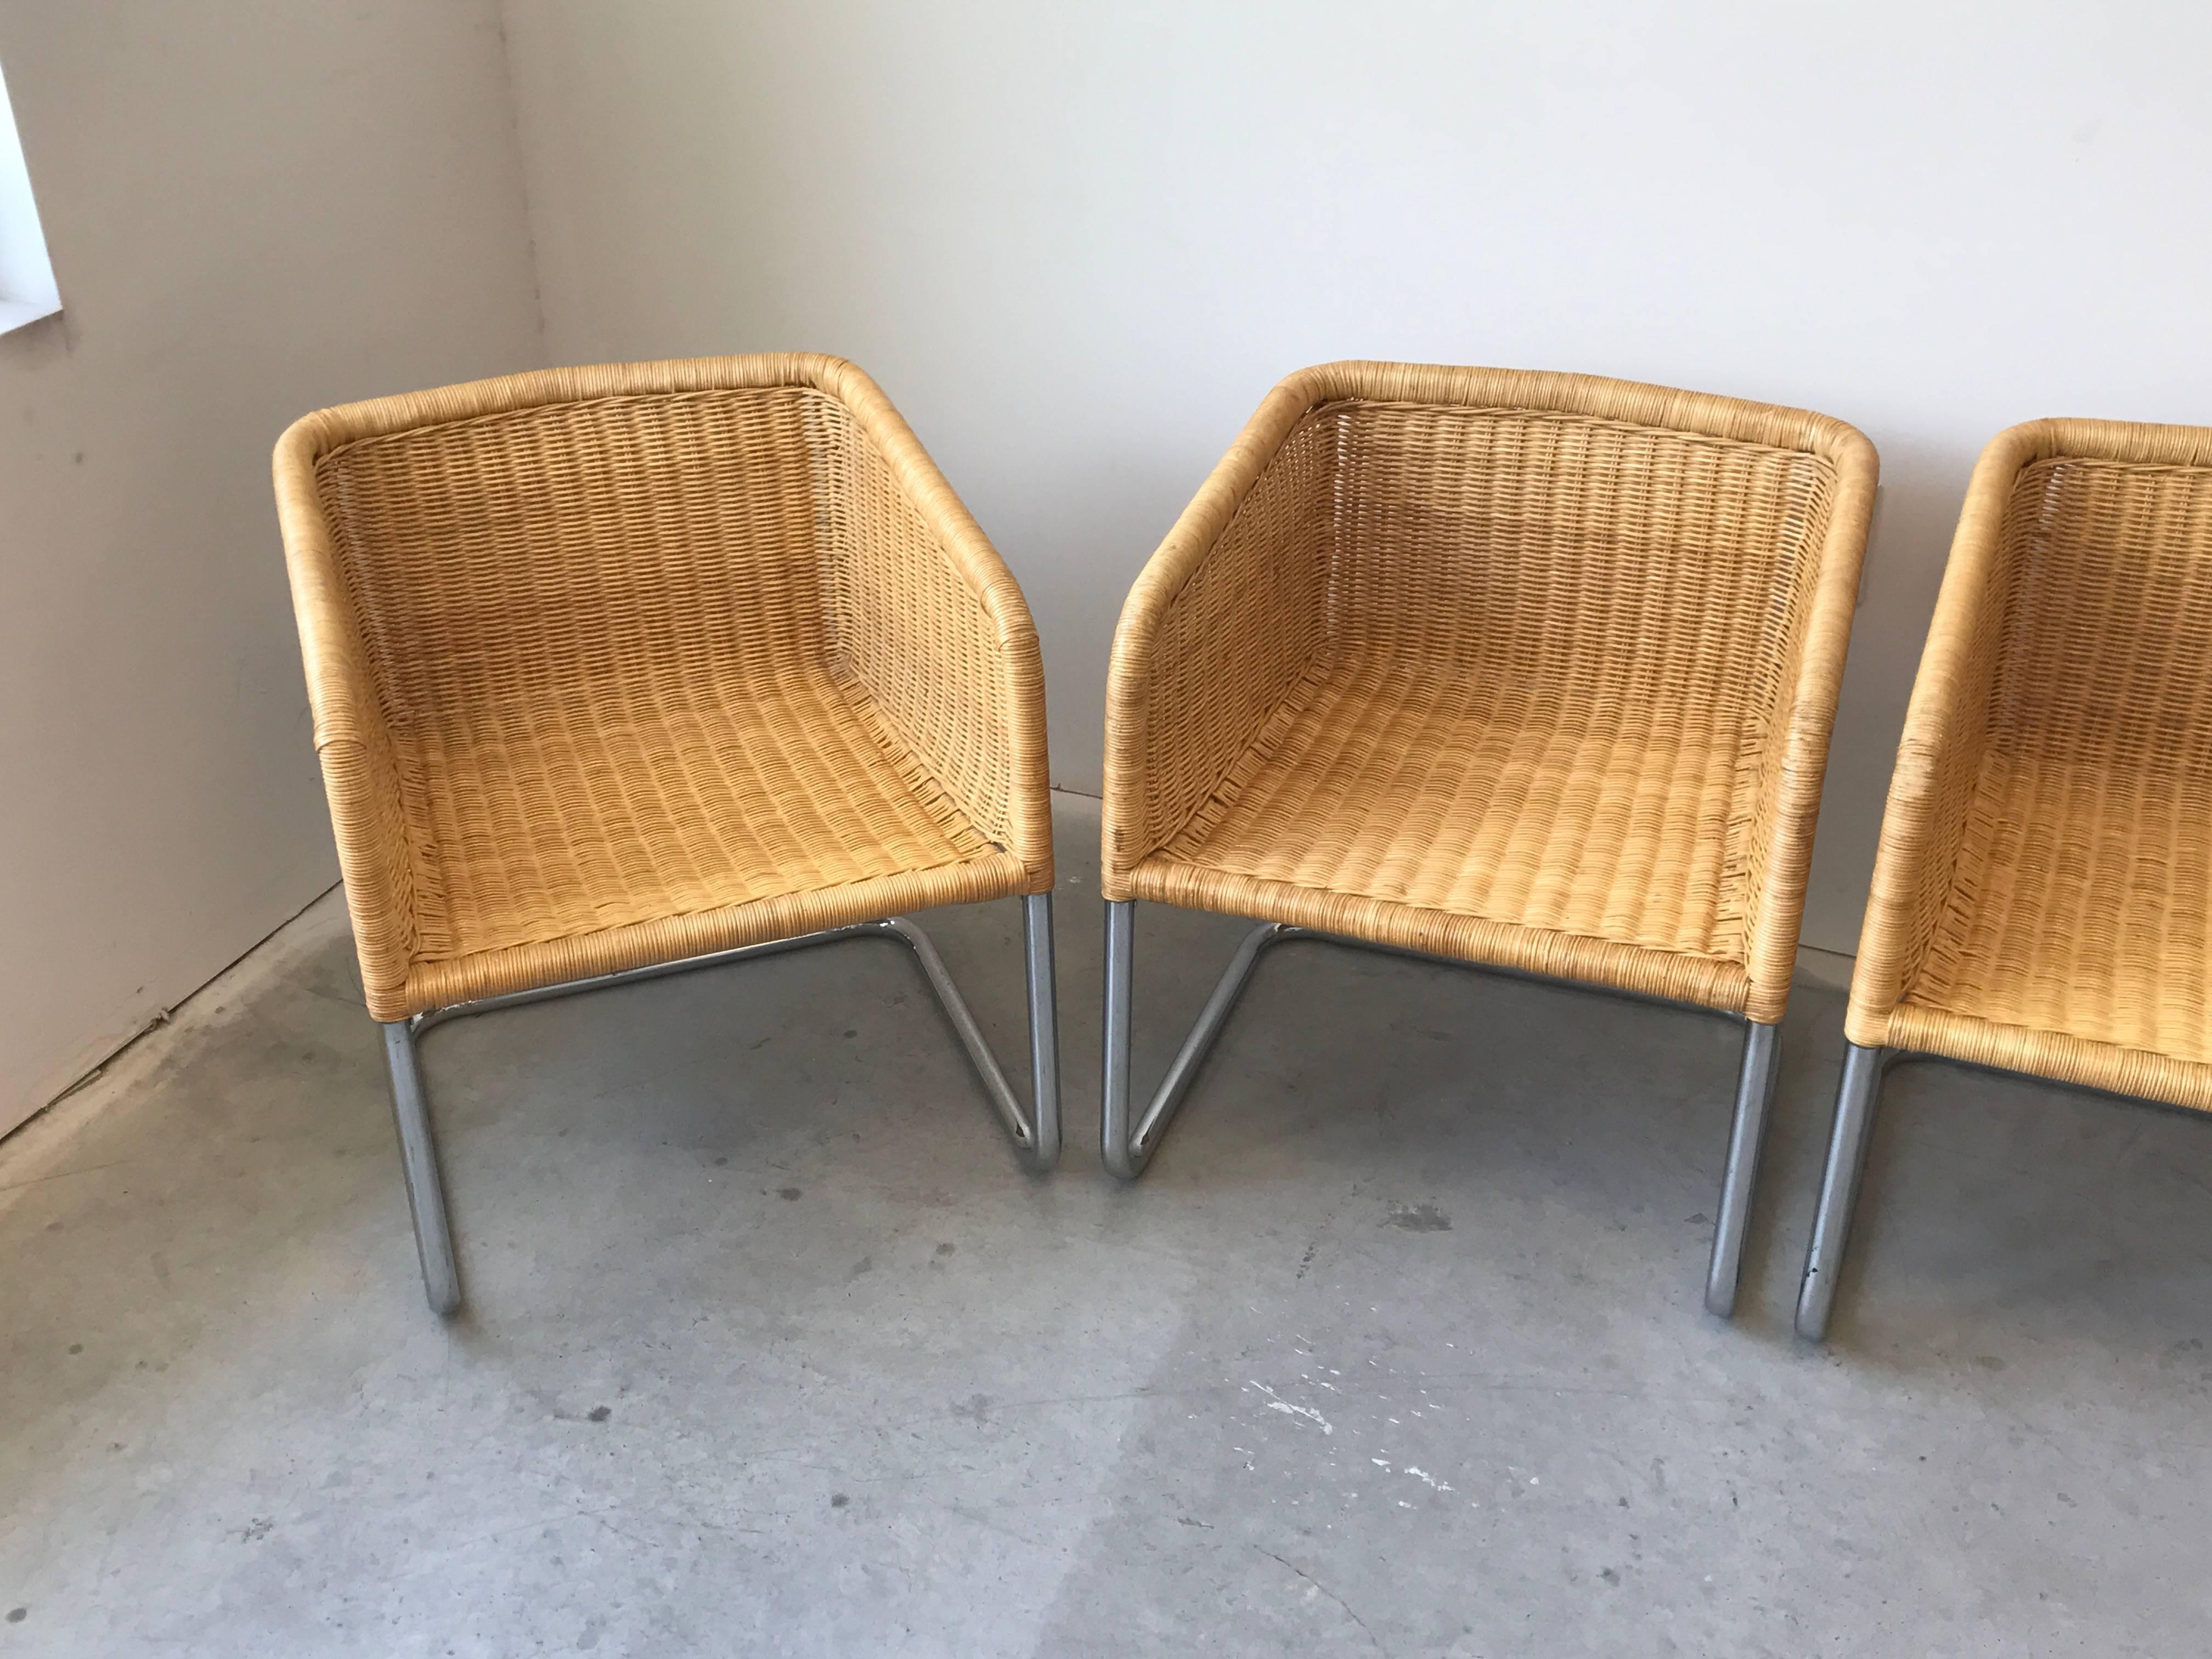 Offered is a fabulous, set of four, 1970s Fabricius and Kastholm style wicker basket cantilever chairs with chrome bases. Extremely sturdy and comfortable. Can easily dress up with a seat cushion.